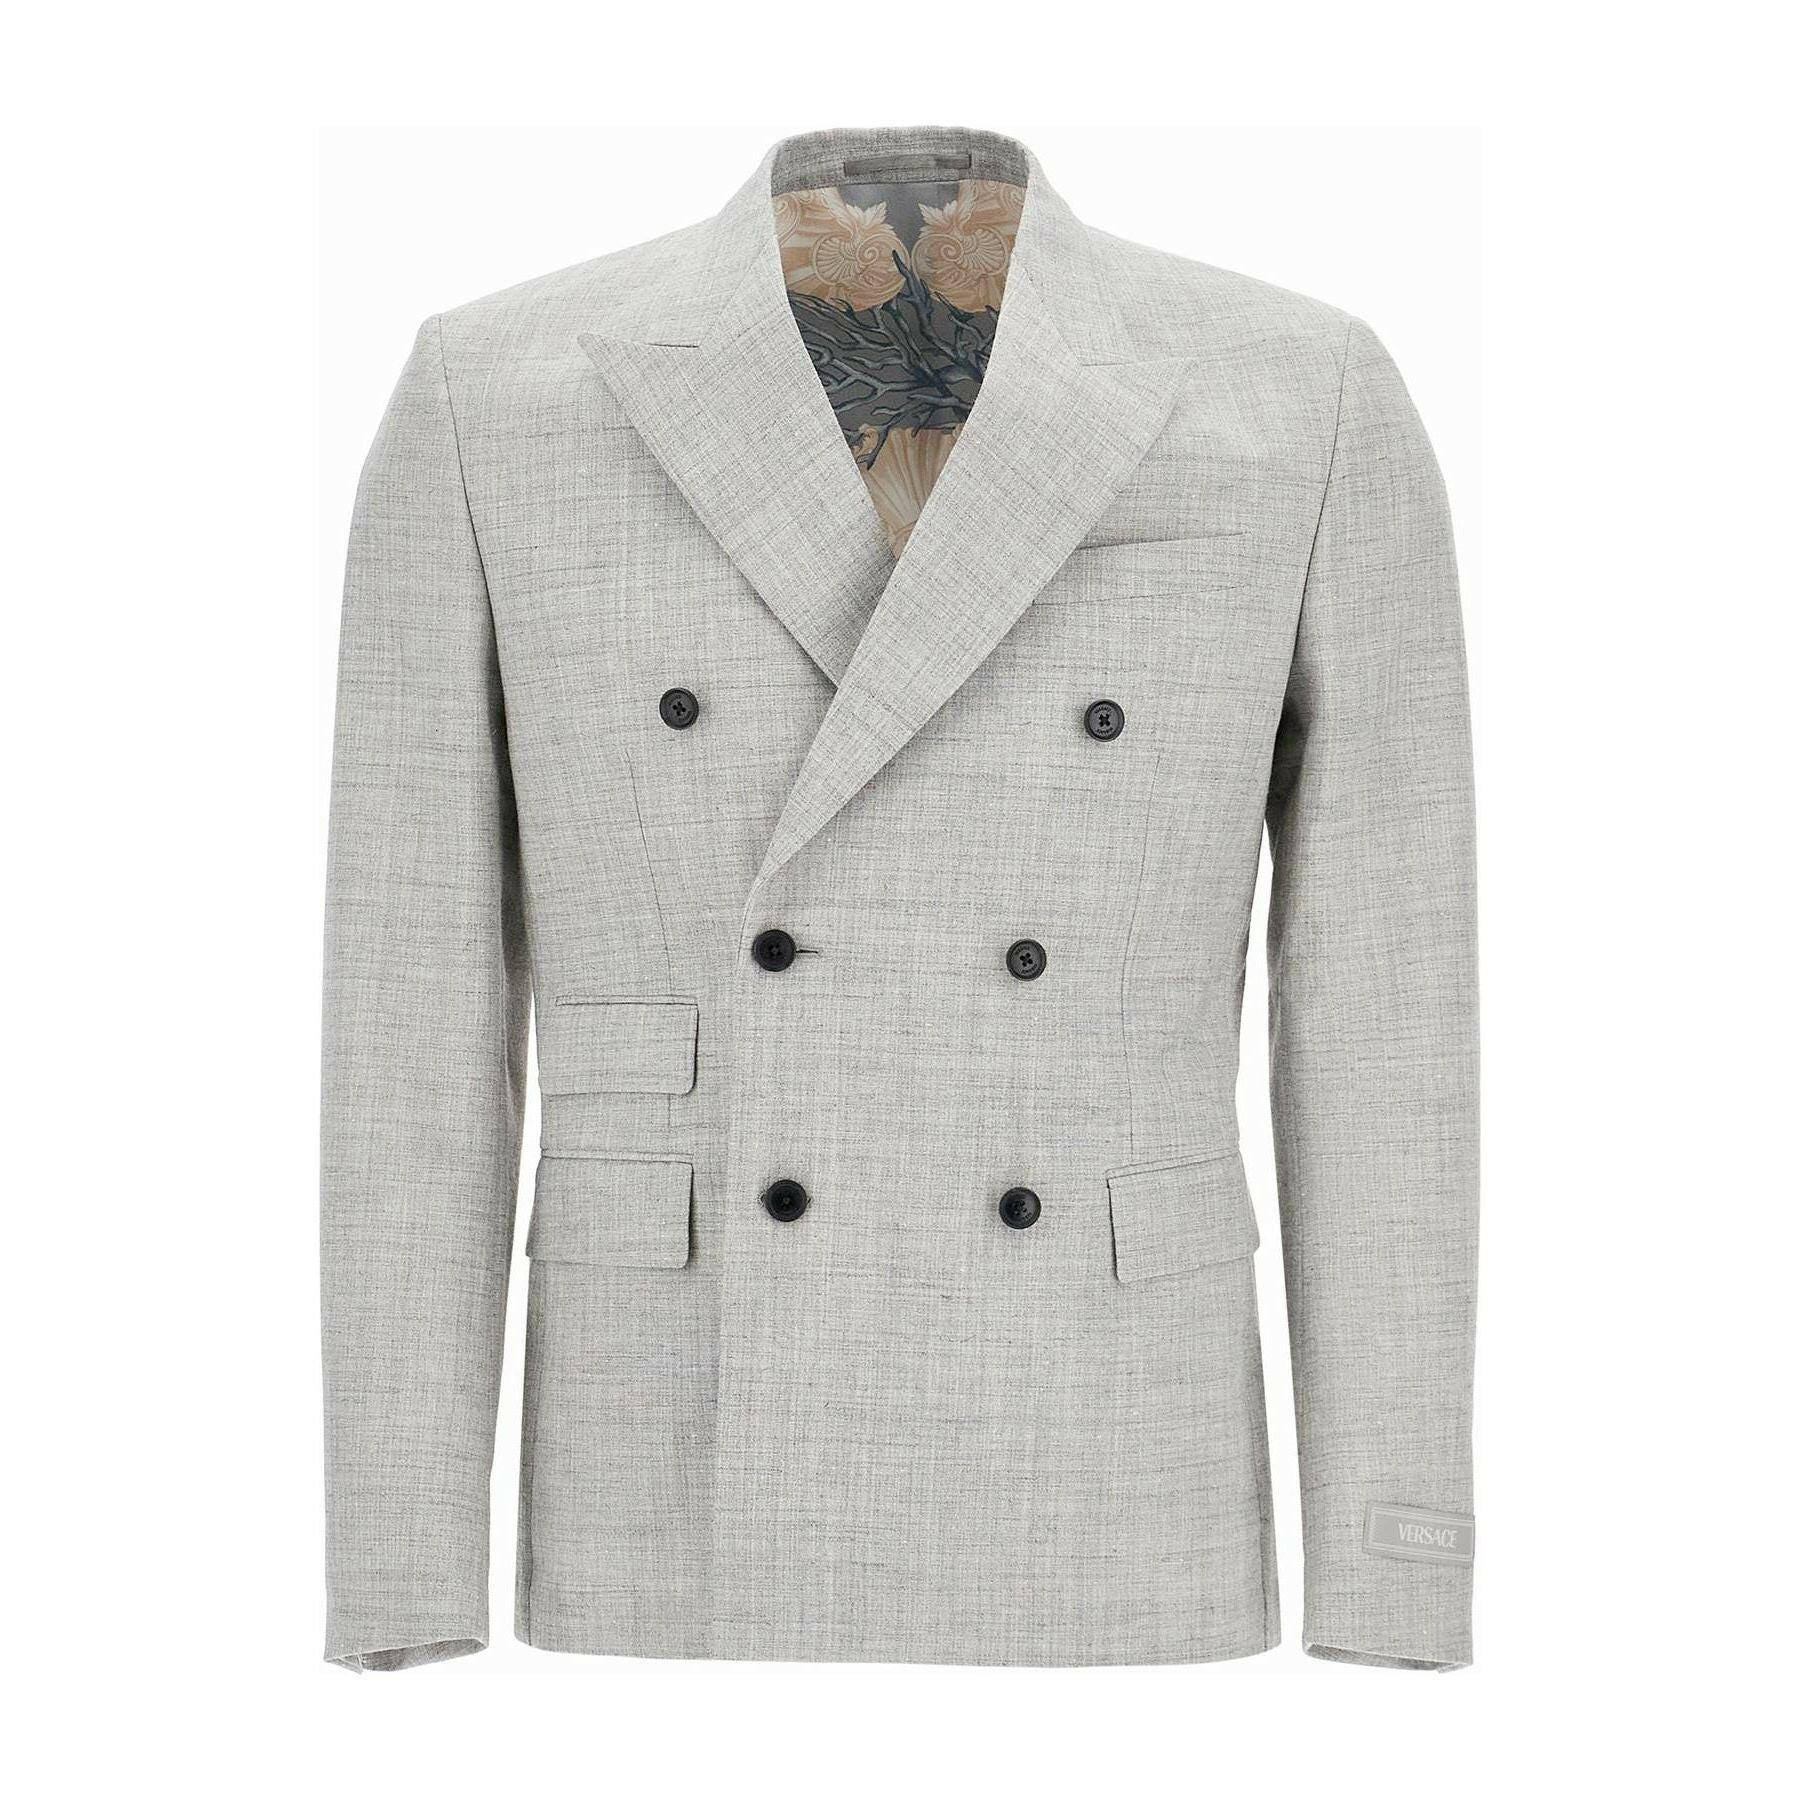 Wool-Blend Double-Breasted Blazer.